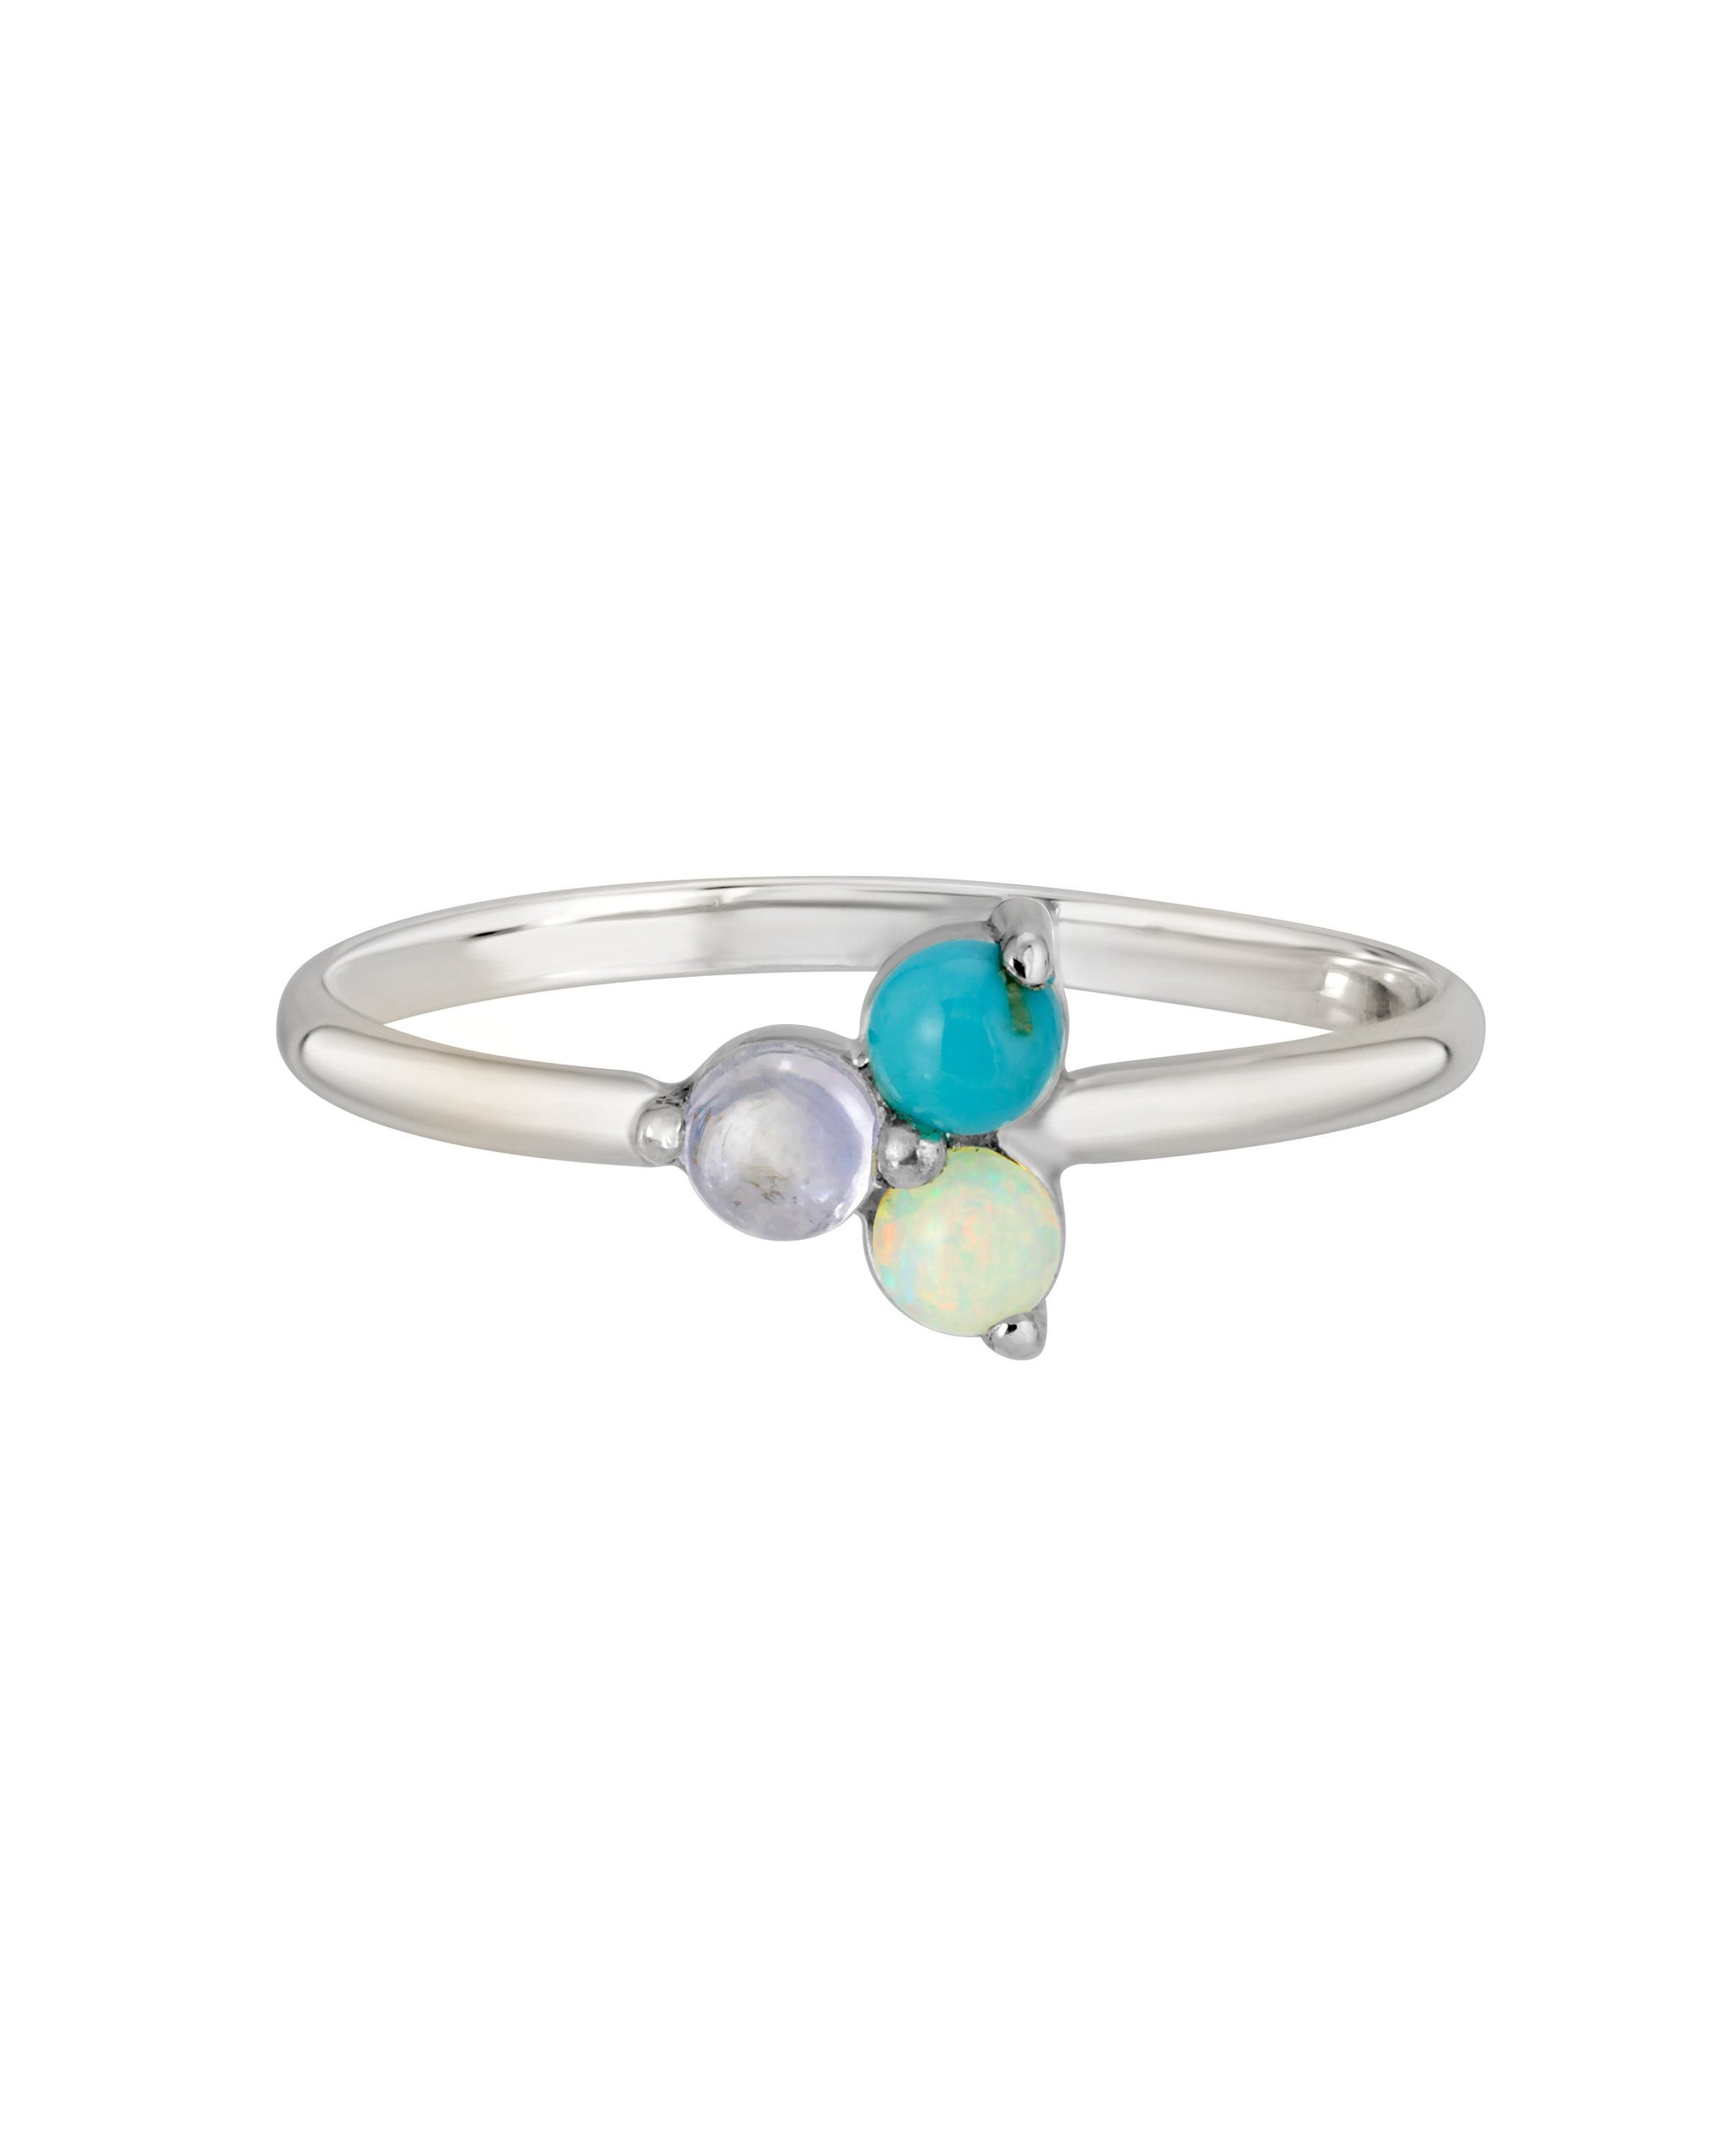 Sterling Silver Aura Ring, three semi-precious stones, prong set, handmade by Turquoise + Tobacco